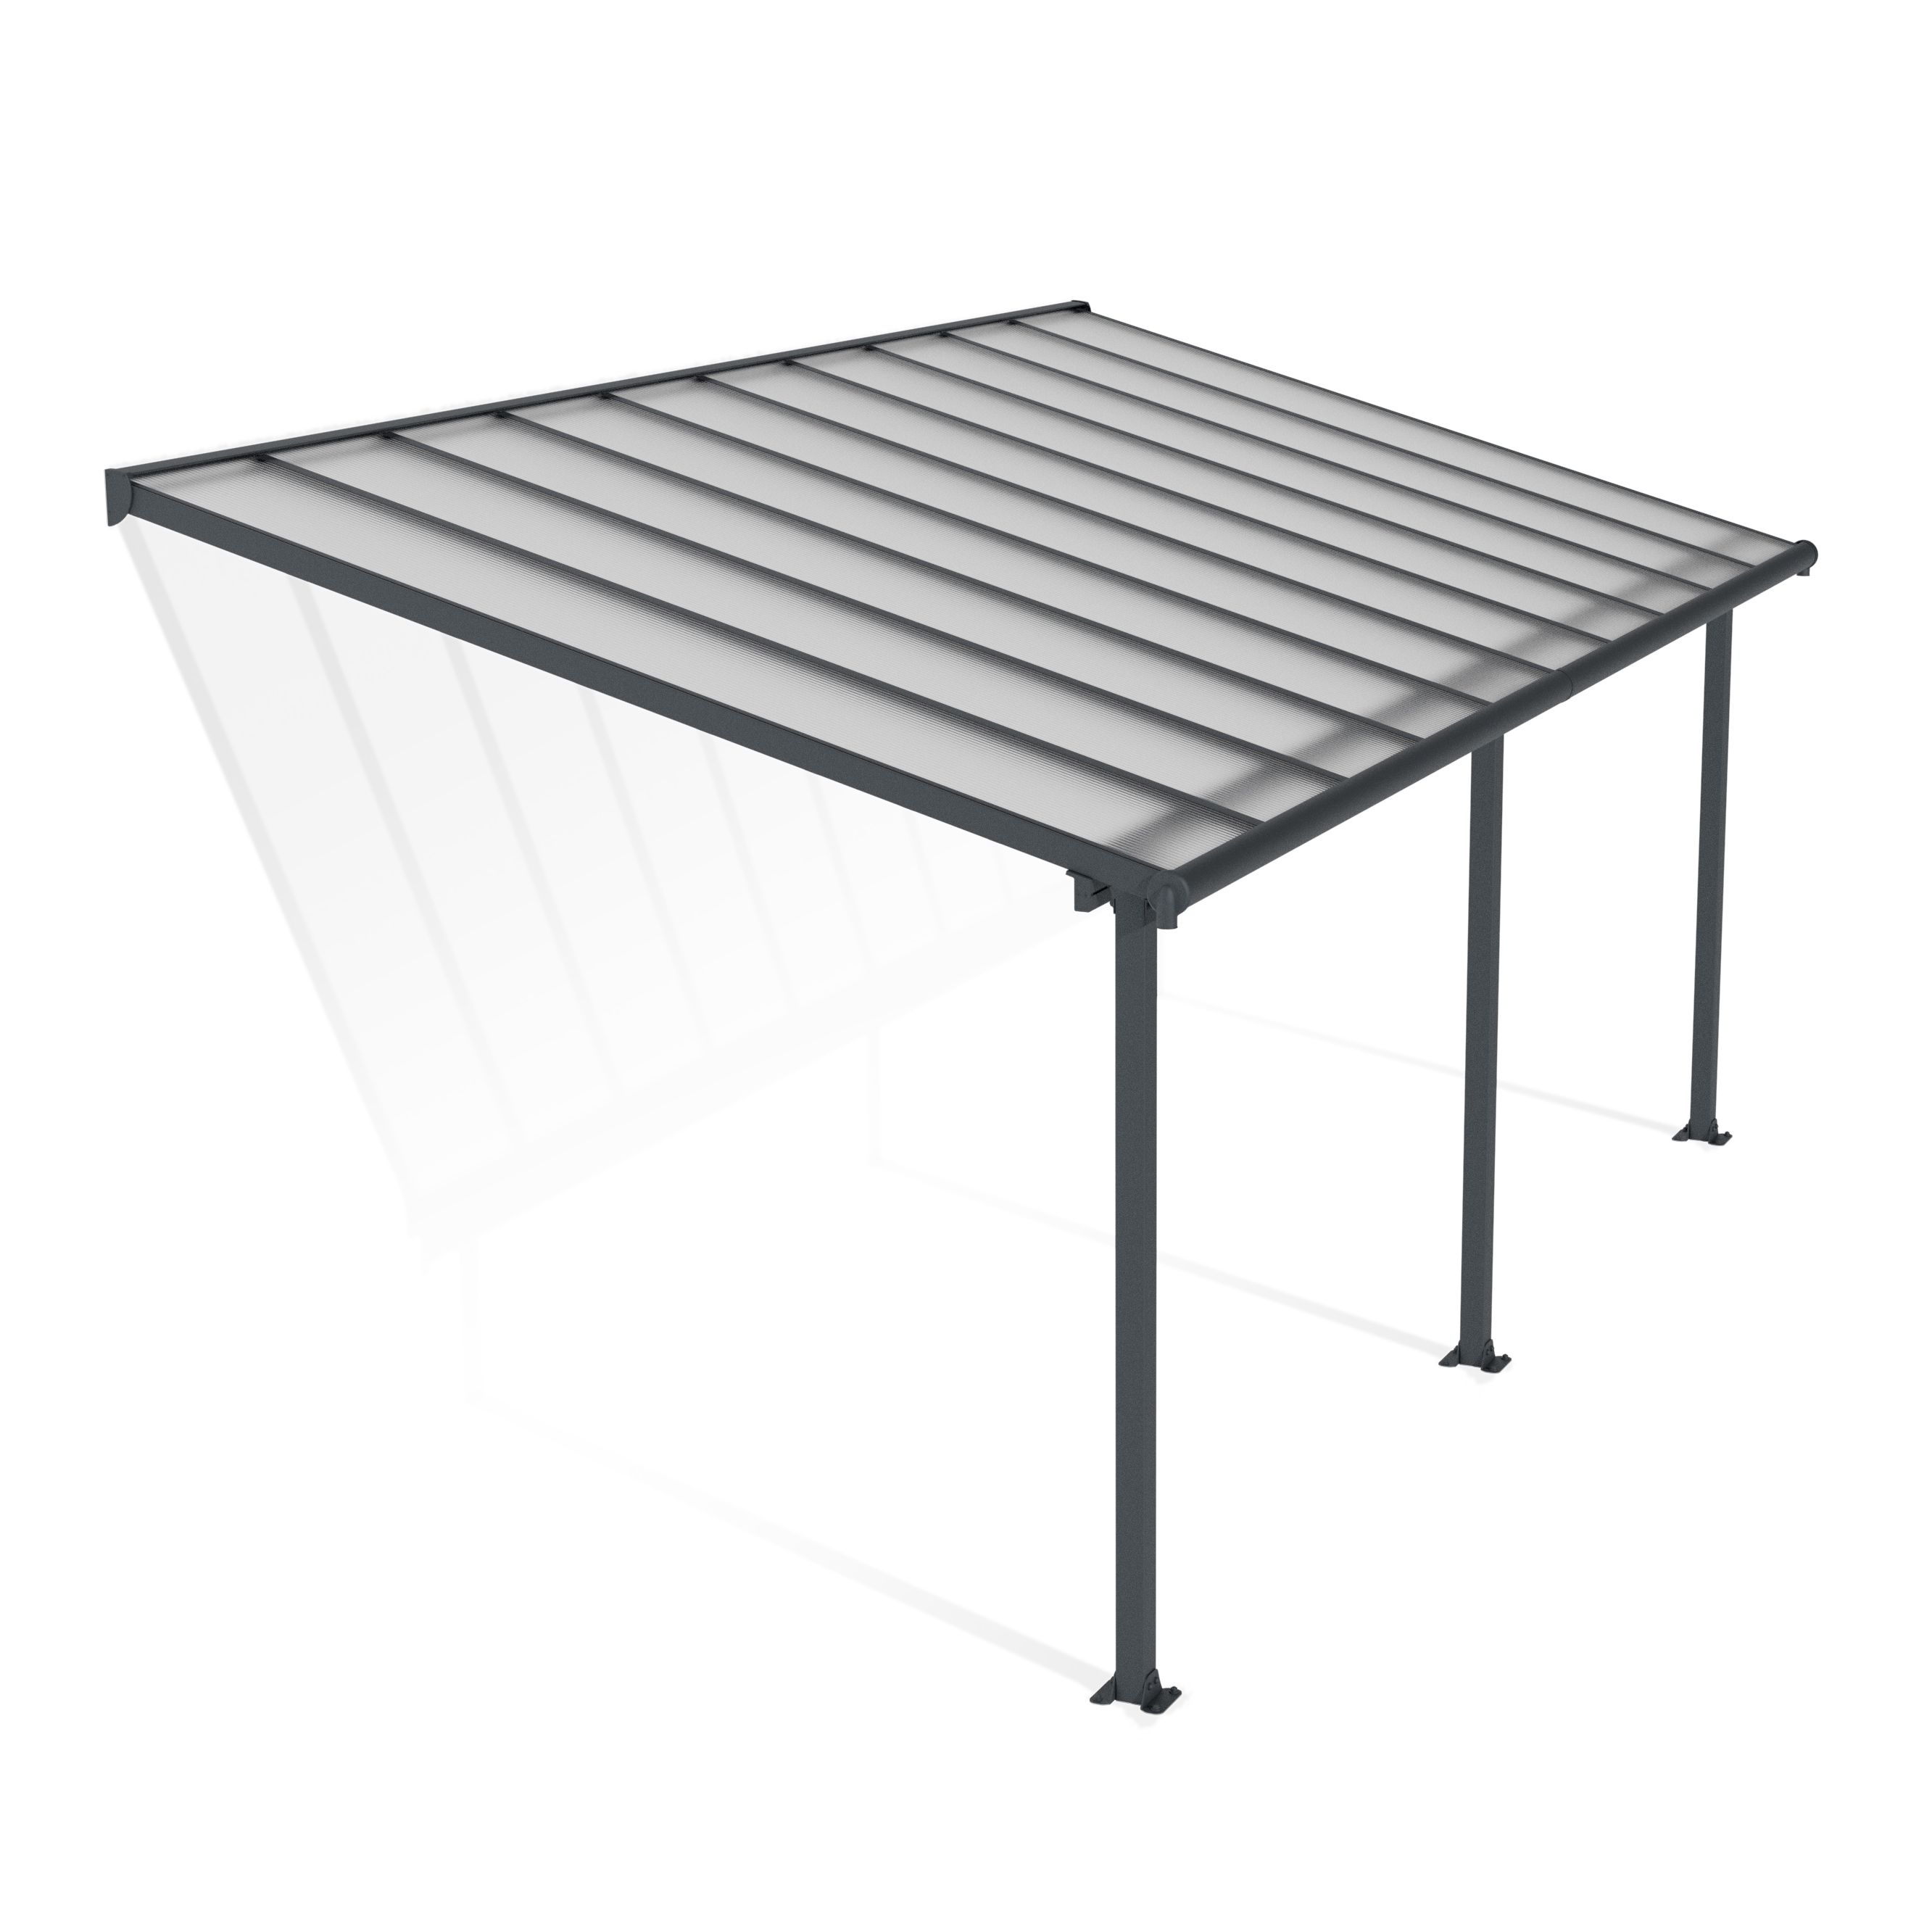 Olympia Grey Patio cover (H)3050mm (W)2950mm (D)6100mm